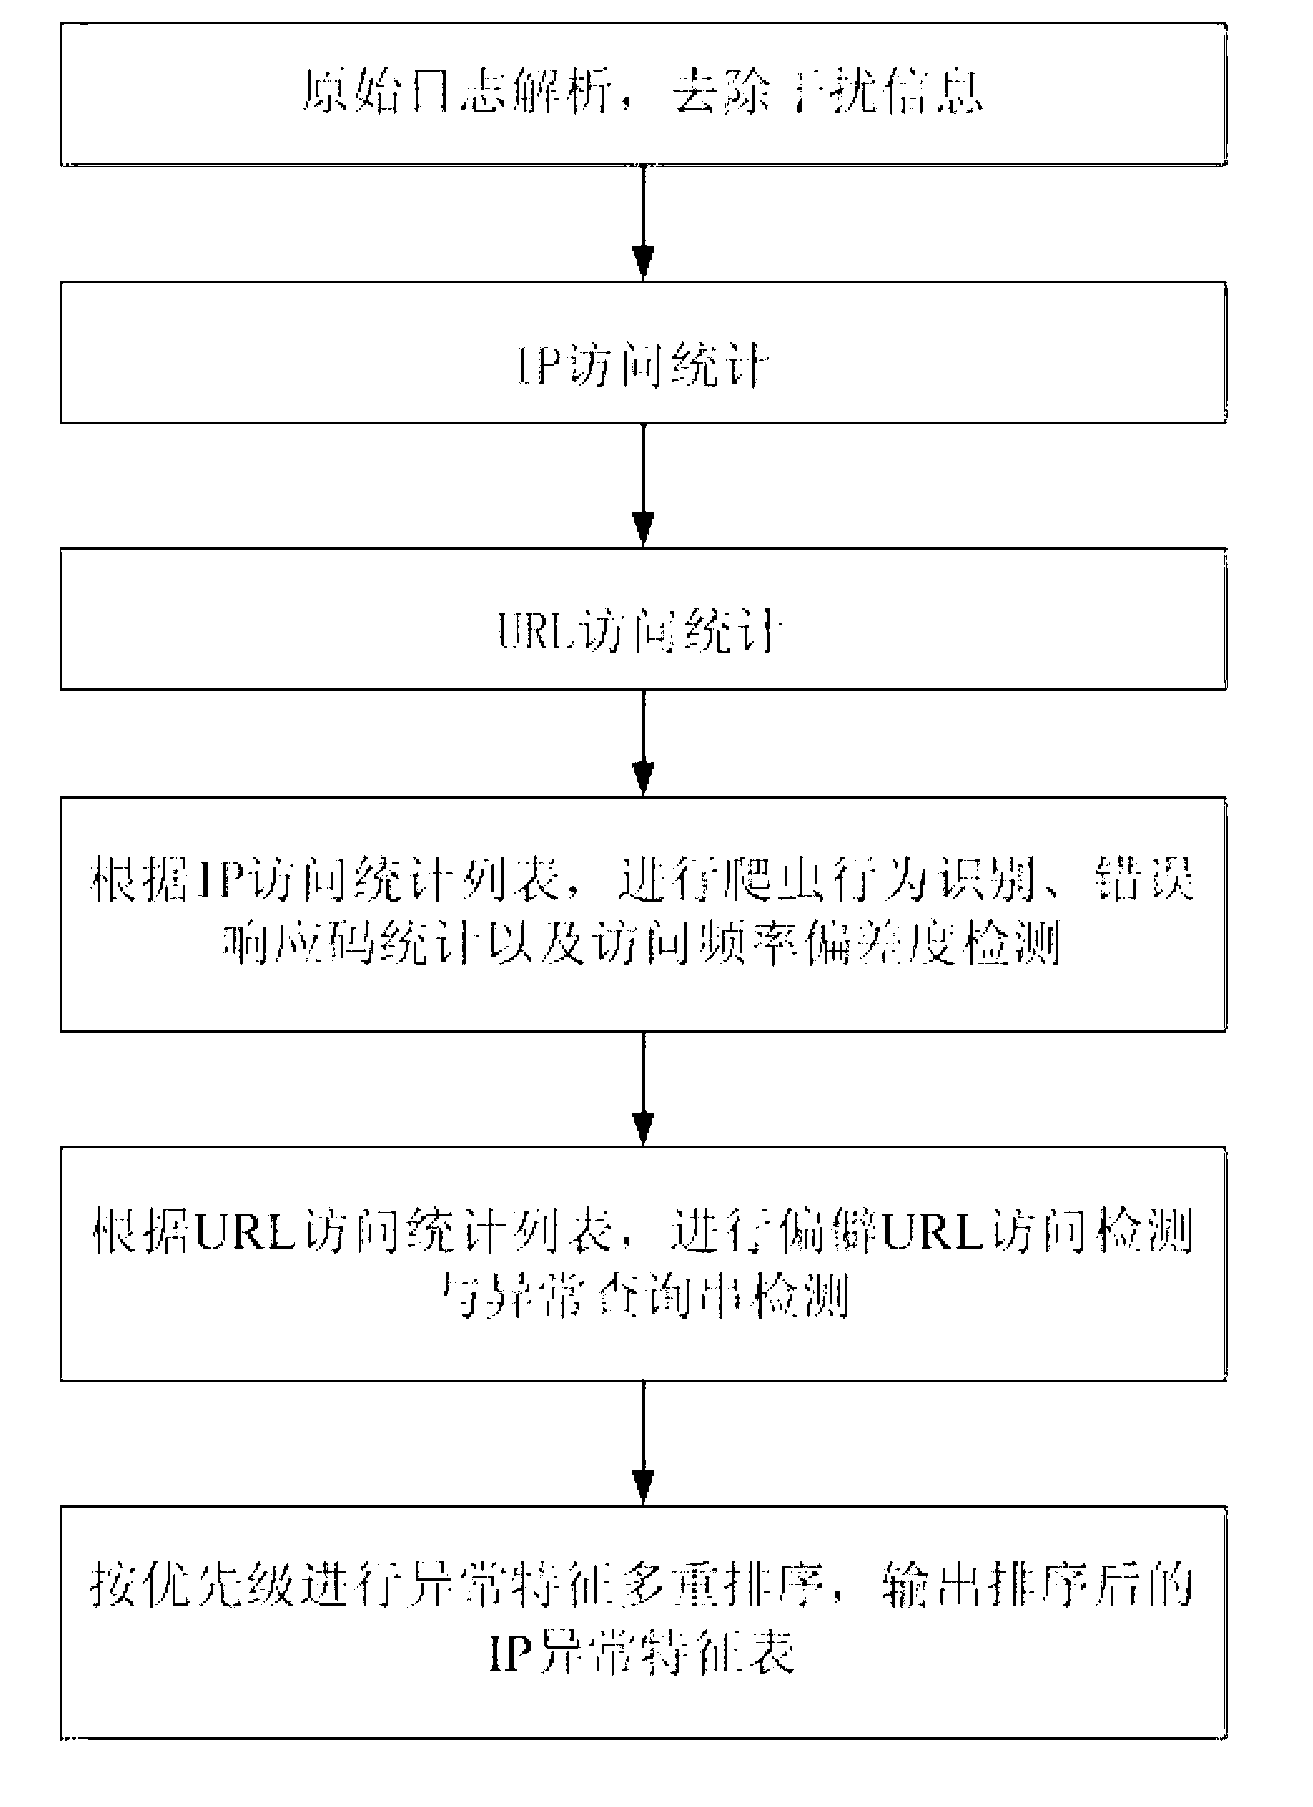 Abnormal access behavior detection method and system on basis of WEB logs